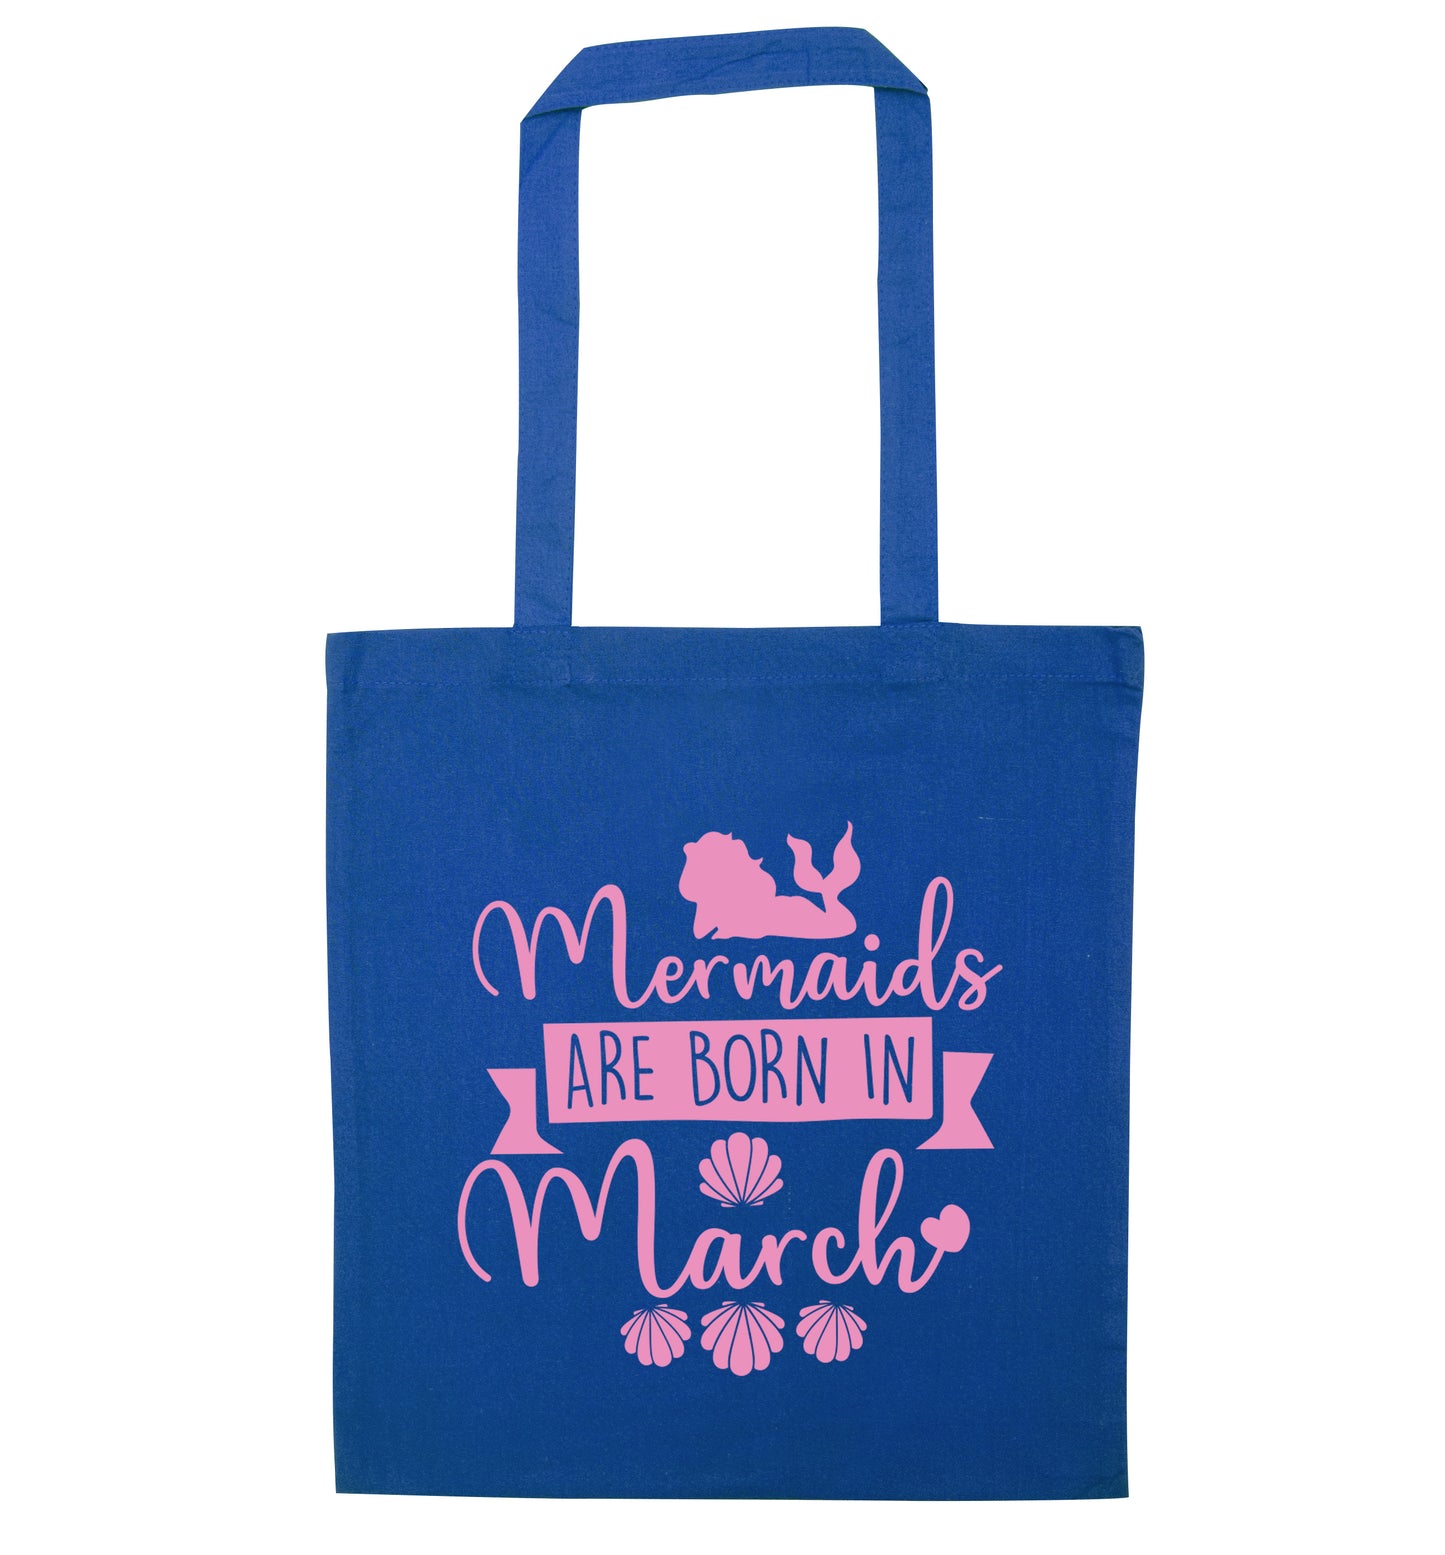 Mermaids are born in March blue tote bag